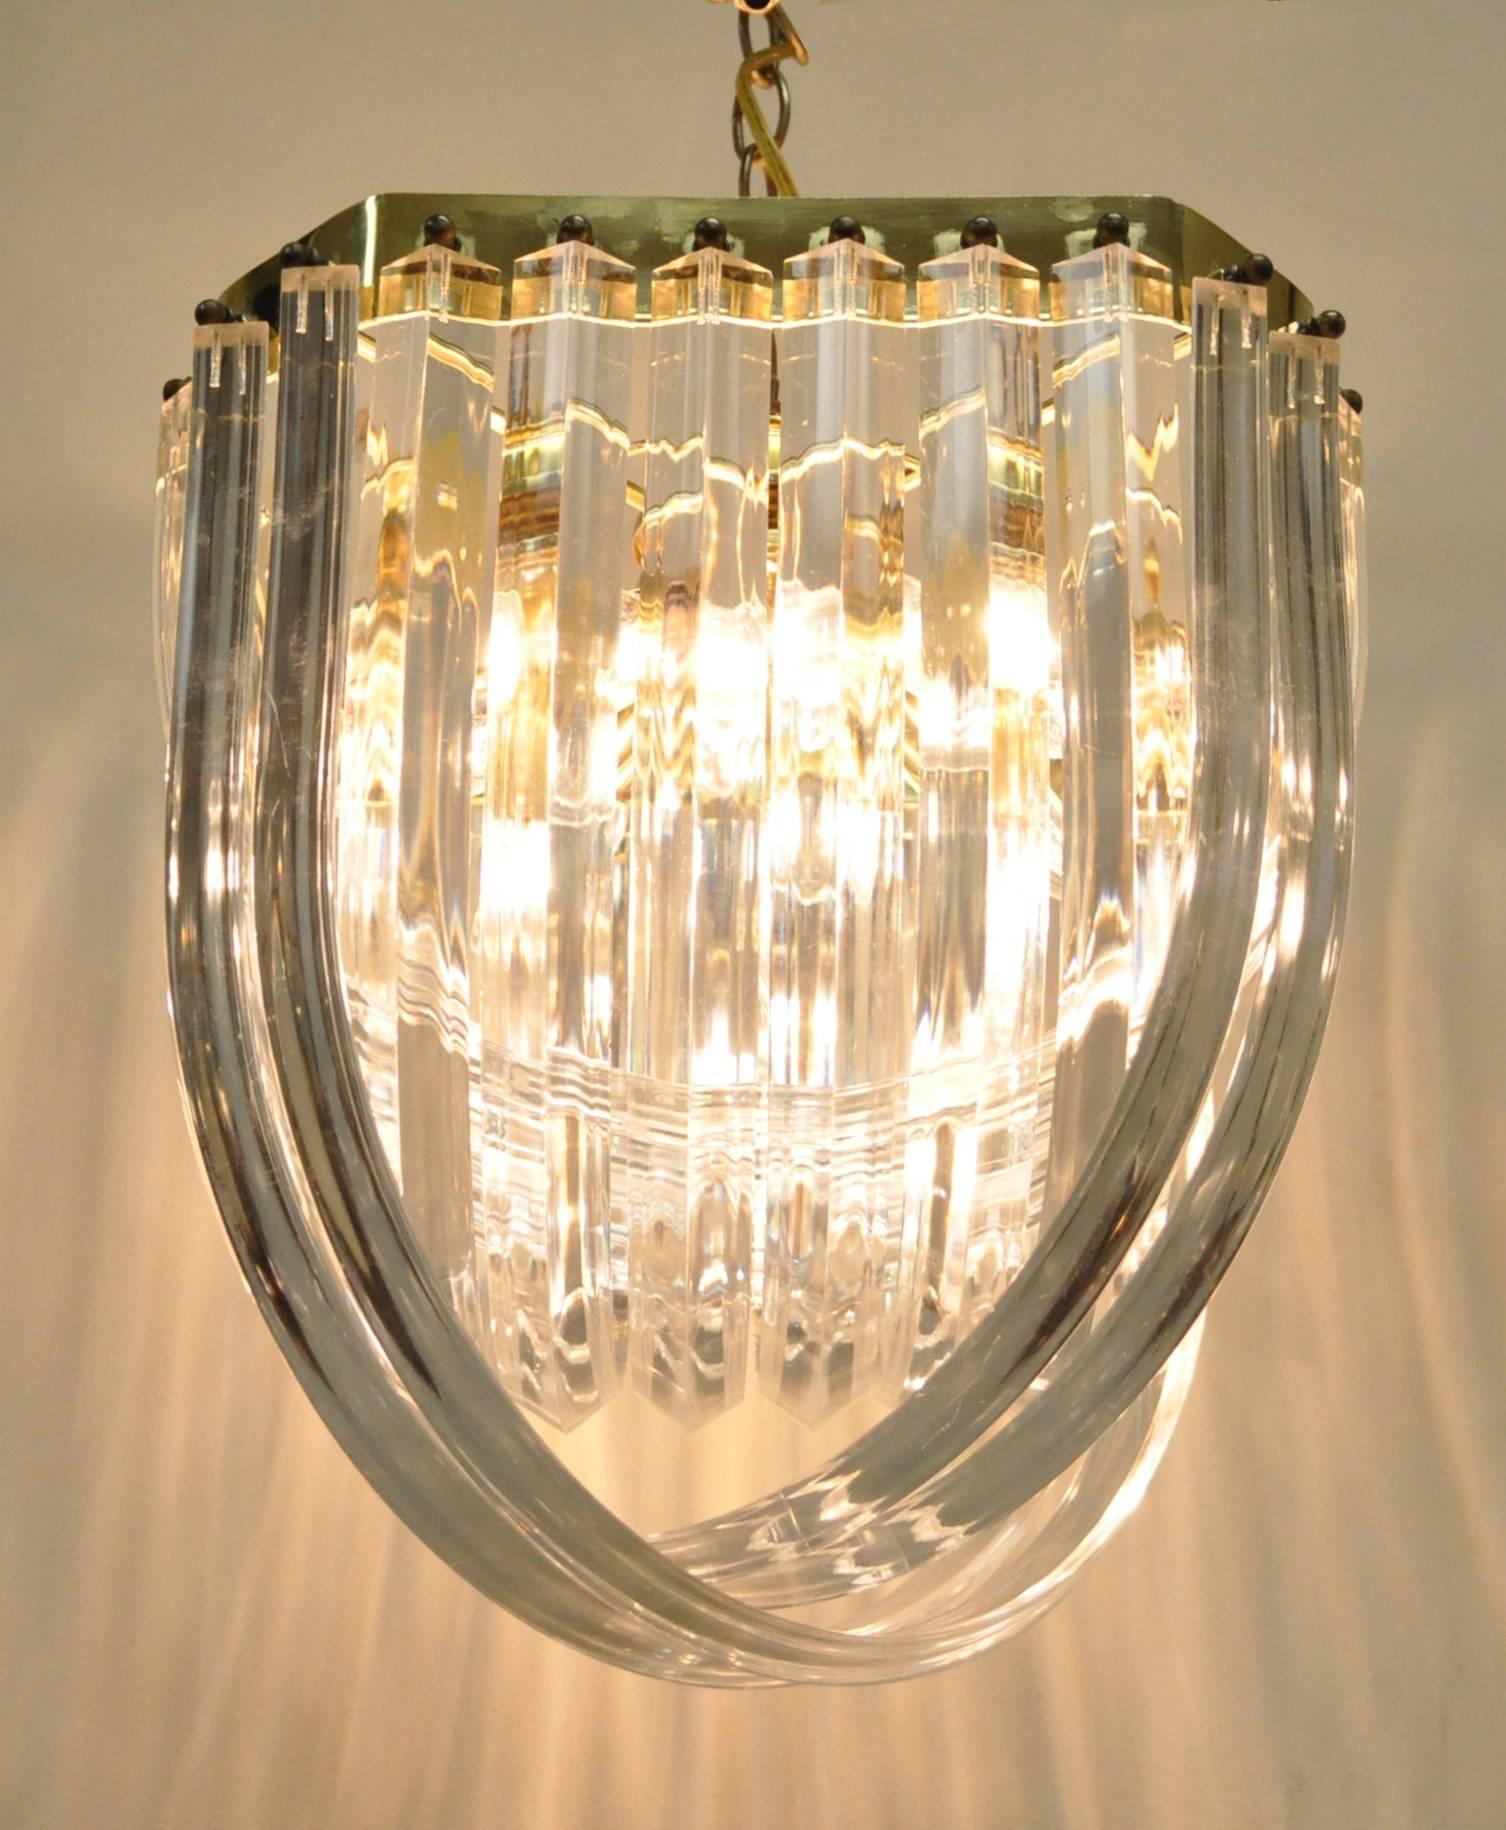 Vintage Mid Century Modern/Hollywood Regency Lucite 'Ribbon' Chandelier. Truly beautiful when lit up with the lucite refracting the light while the brass reflects it for an impressive amount of illumination. The chandelier has 8 lights total.